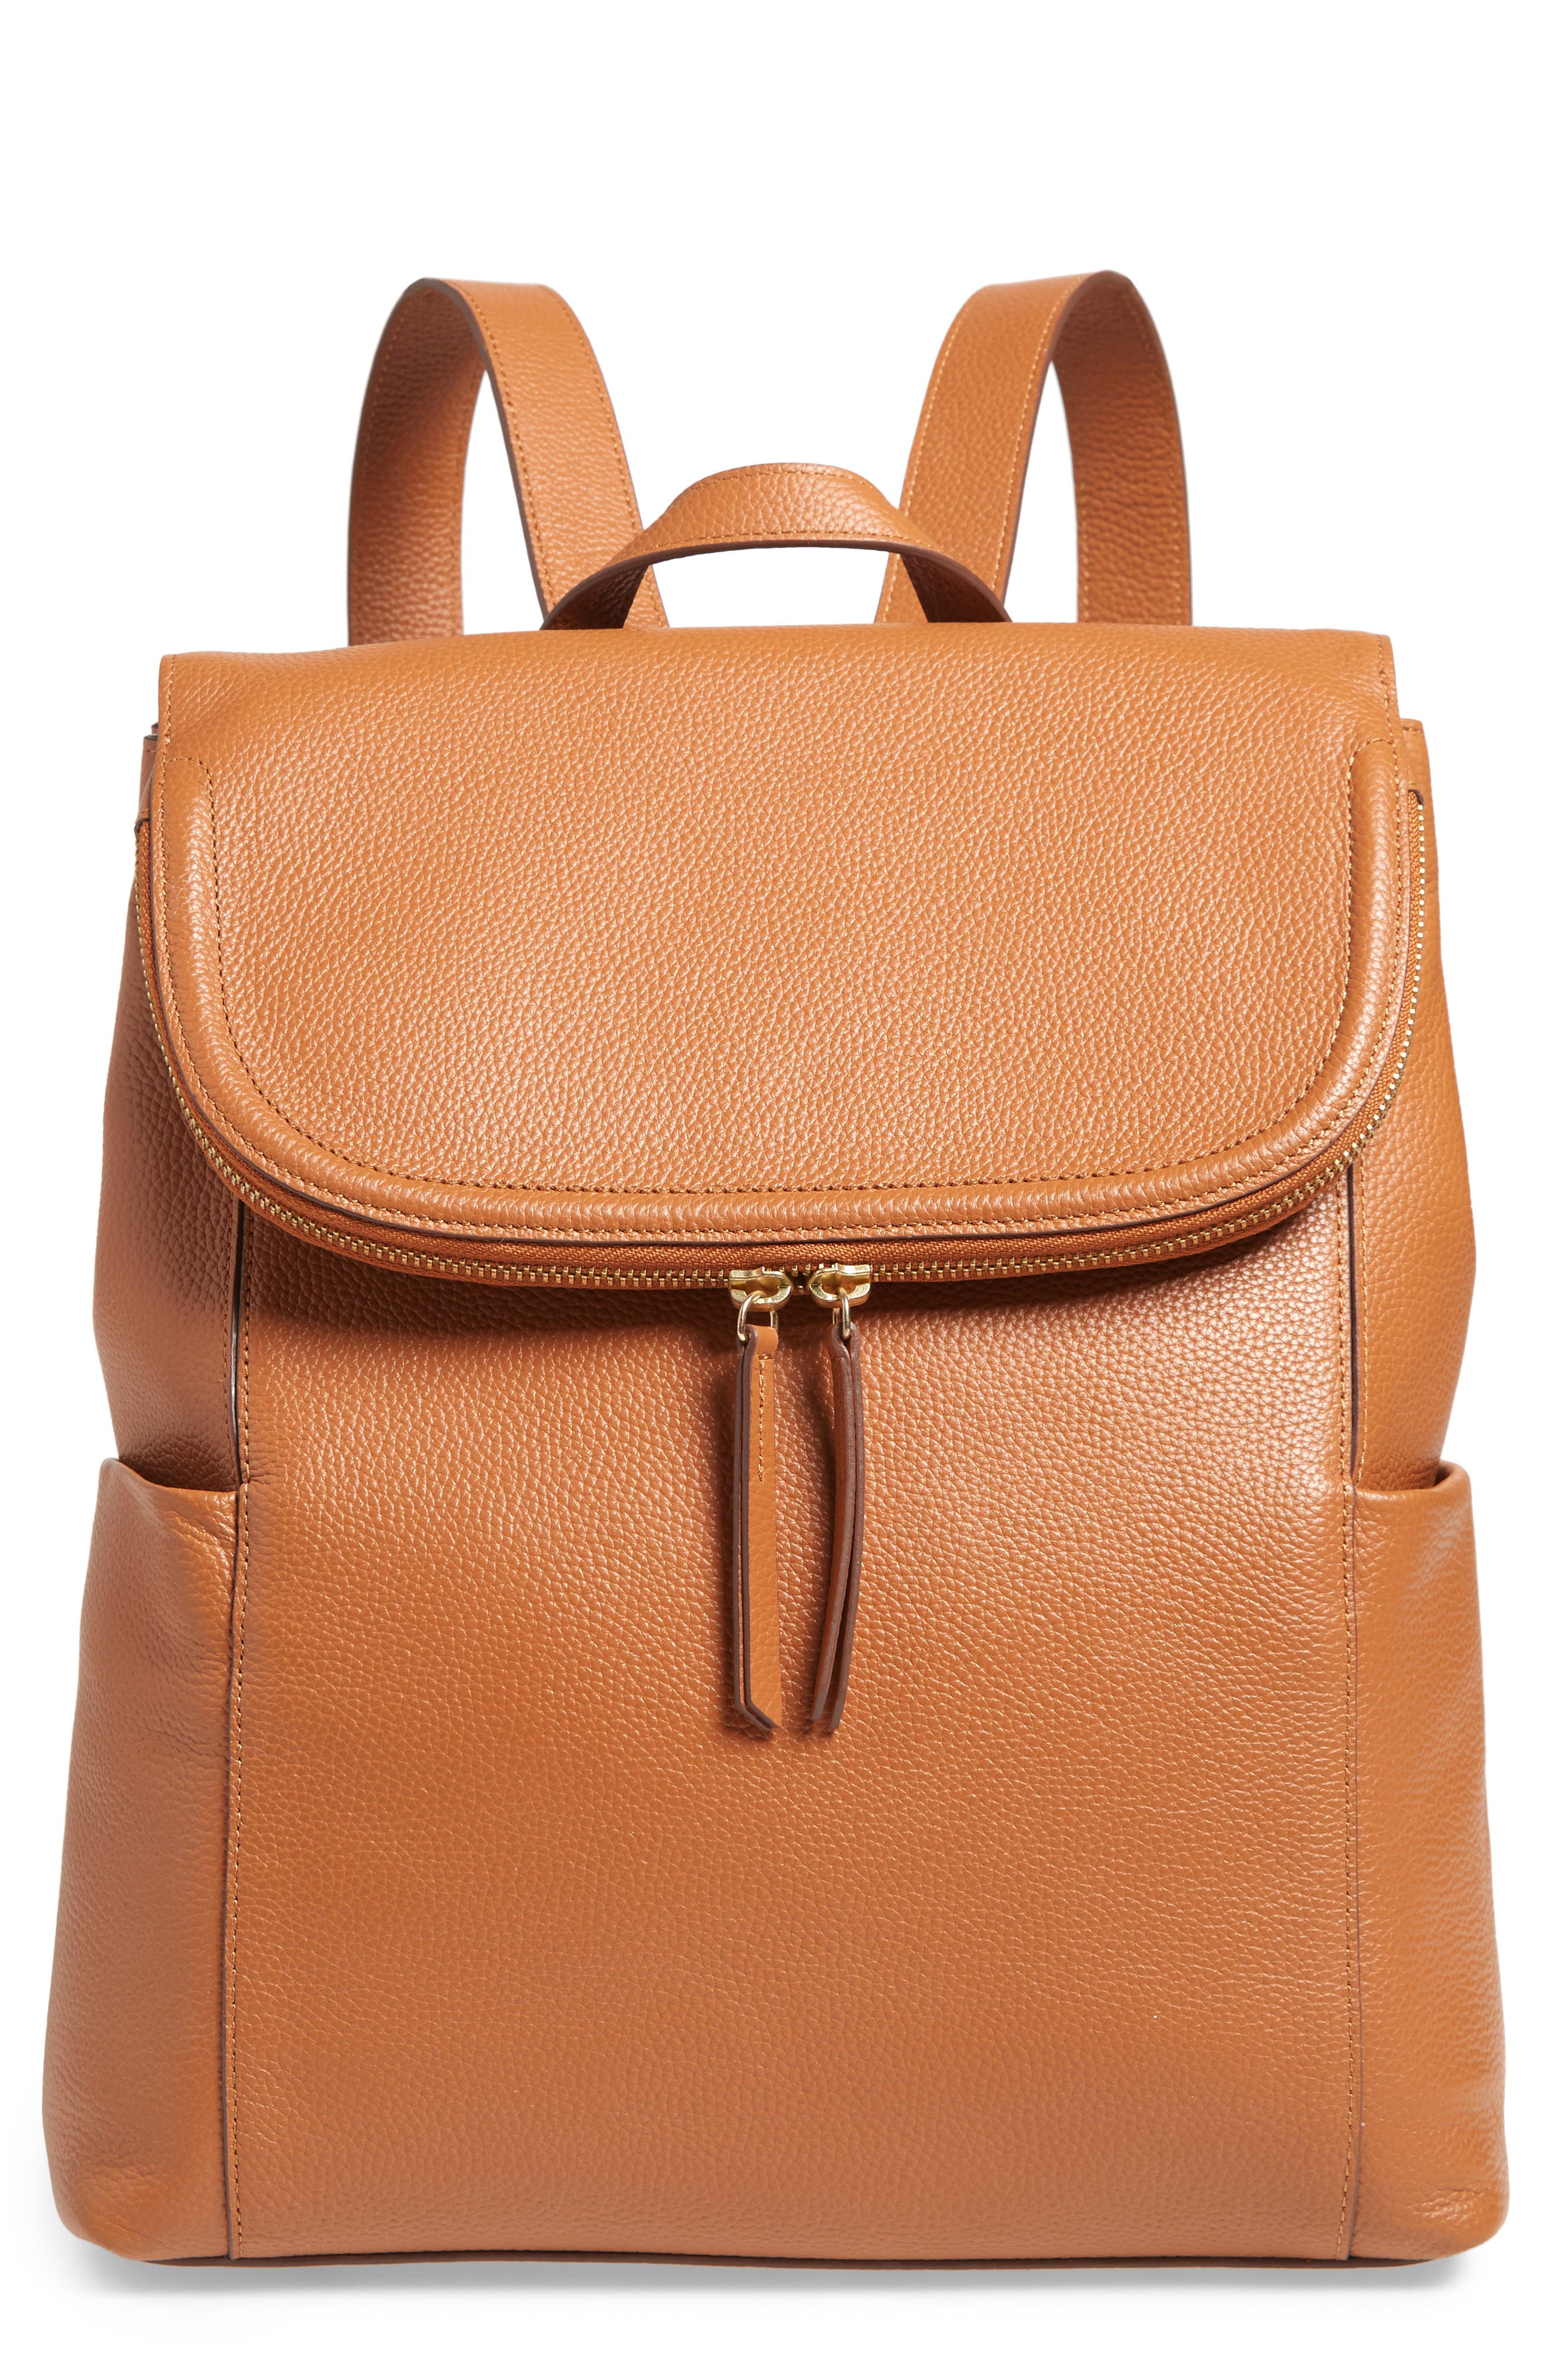 women's leather backpacks on sale